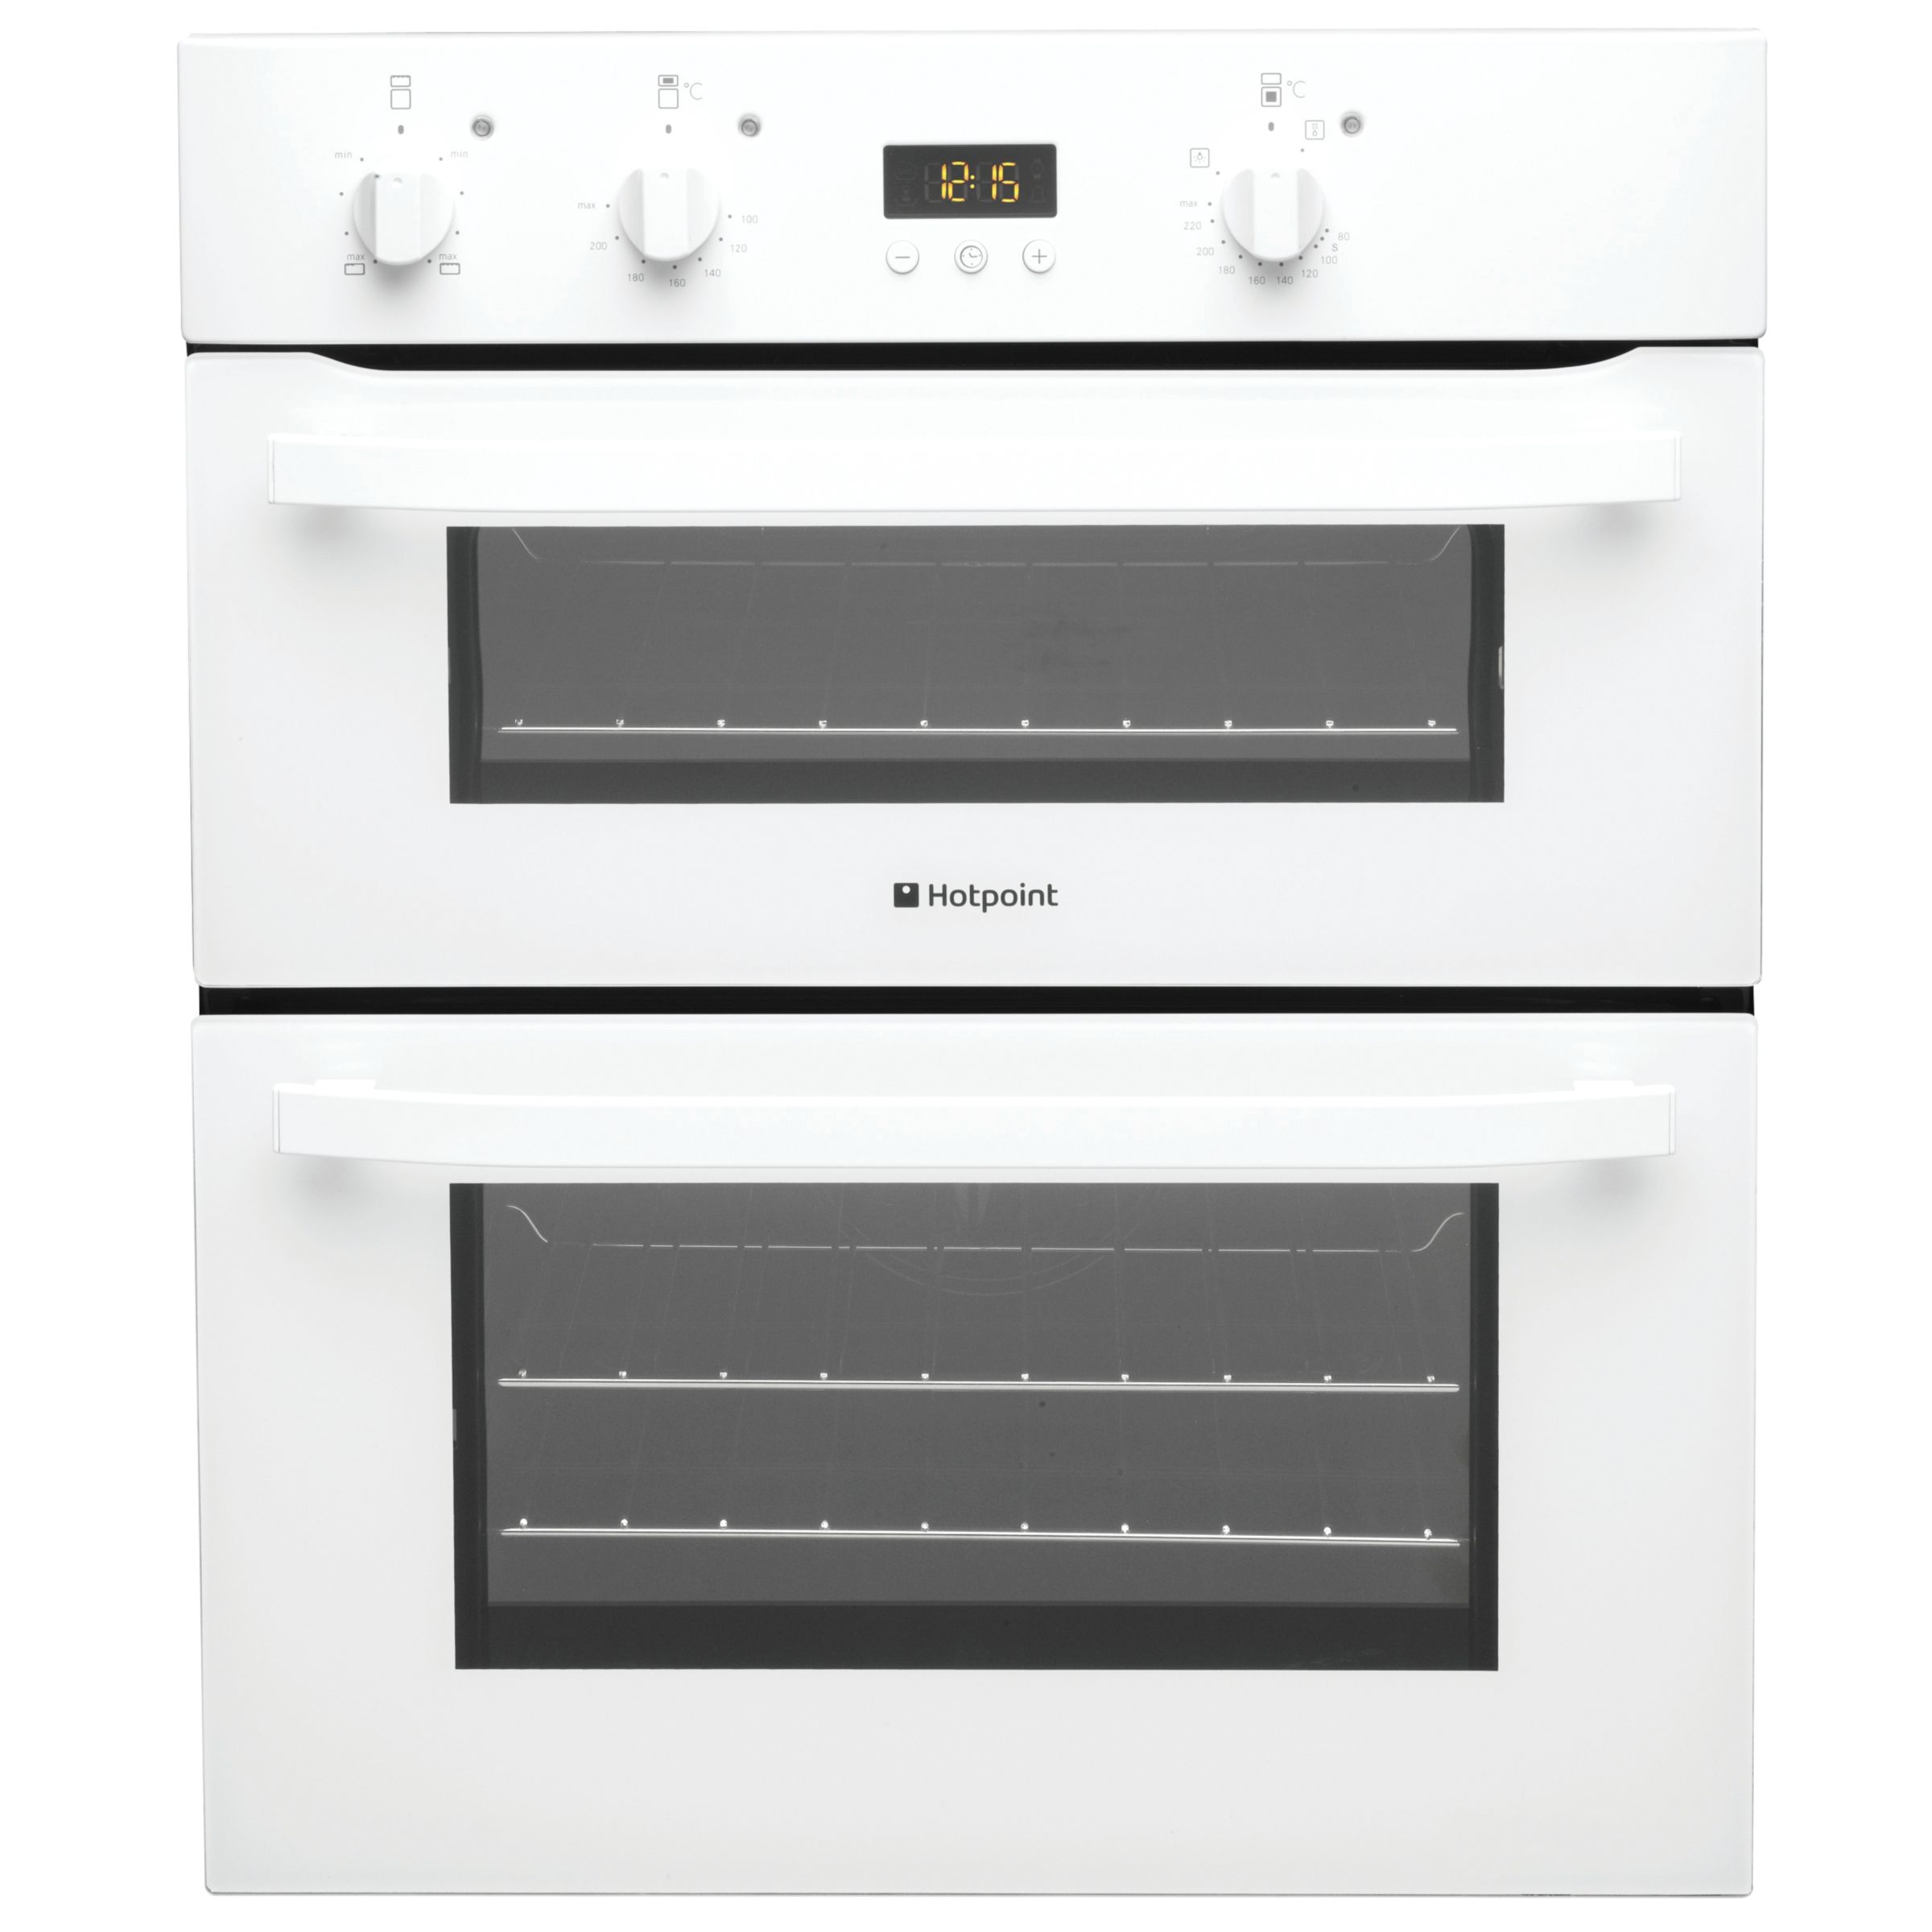 Hotpoint UH53W Built-Under Double Electric Oven, White at John Lewis